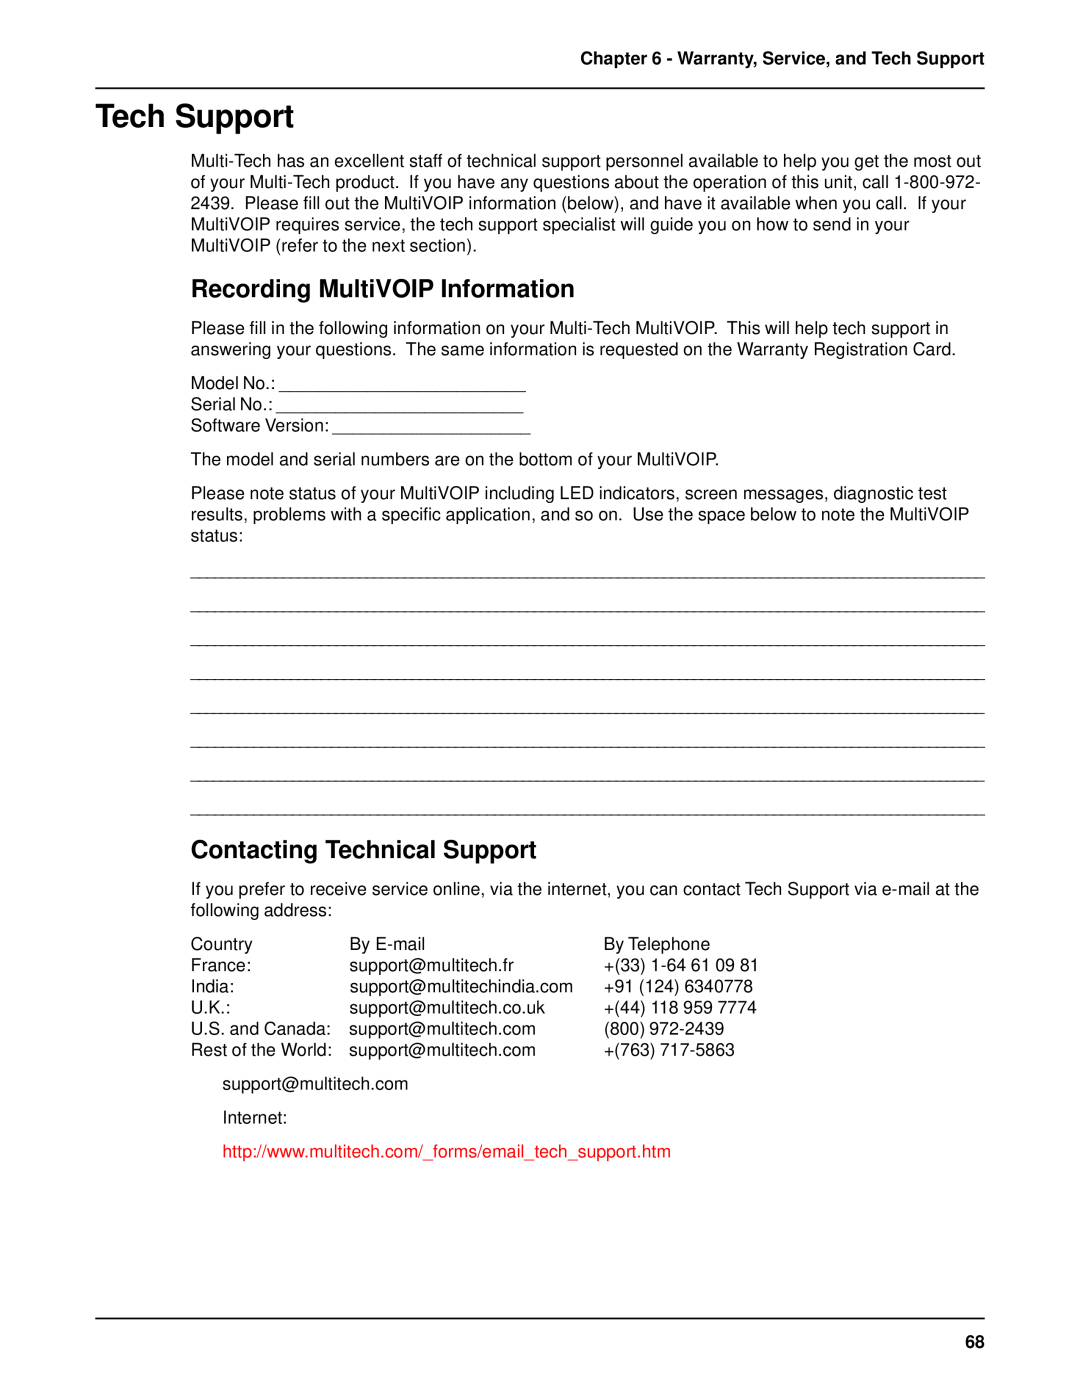 Multi-Tech Systems MVP 800 manual Tech Support, Recording MultiVOIP Information, Contacting Technical Support 